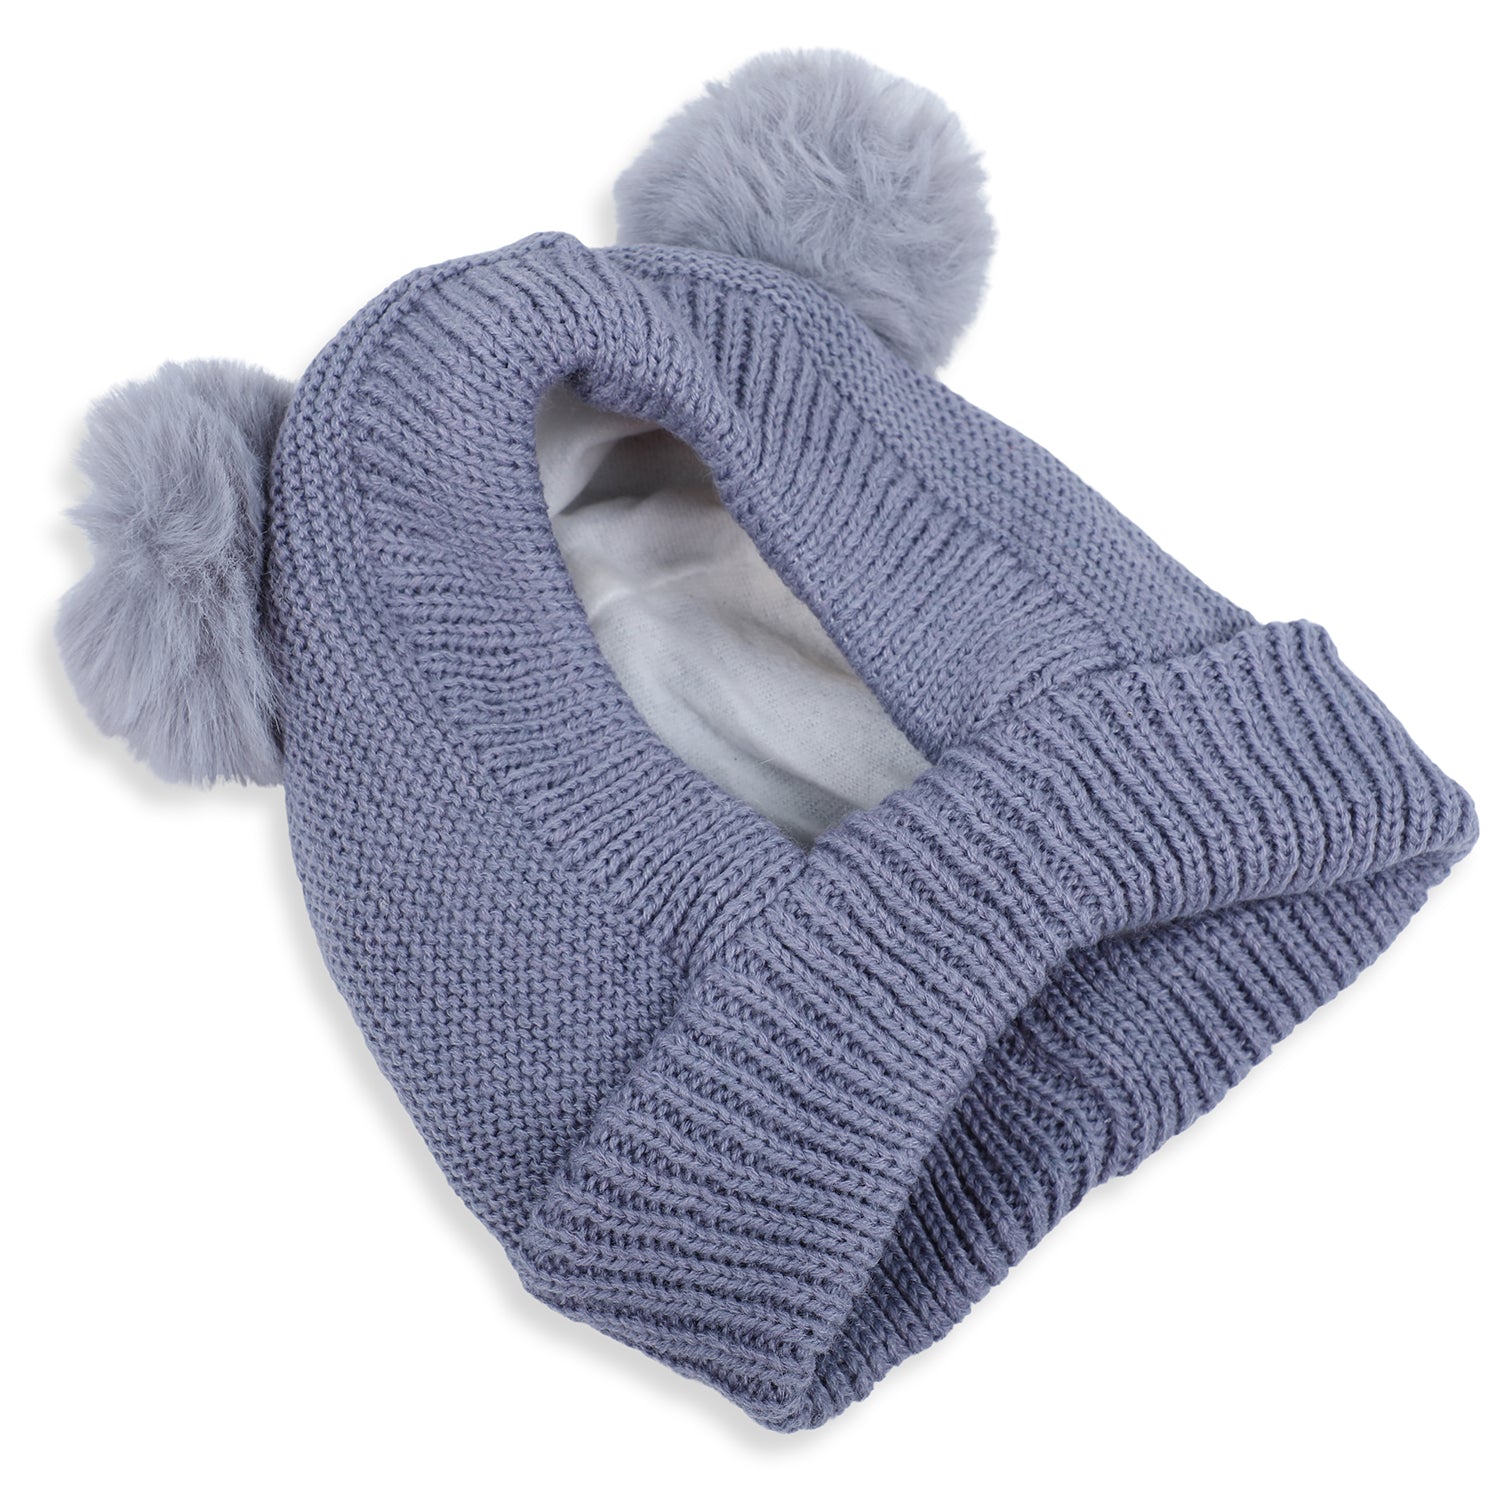 Baby Moo Adorable Pom Pom Knitted Beanie Woollen Cap - Grey - Baby Moo